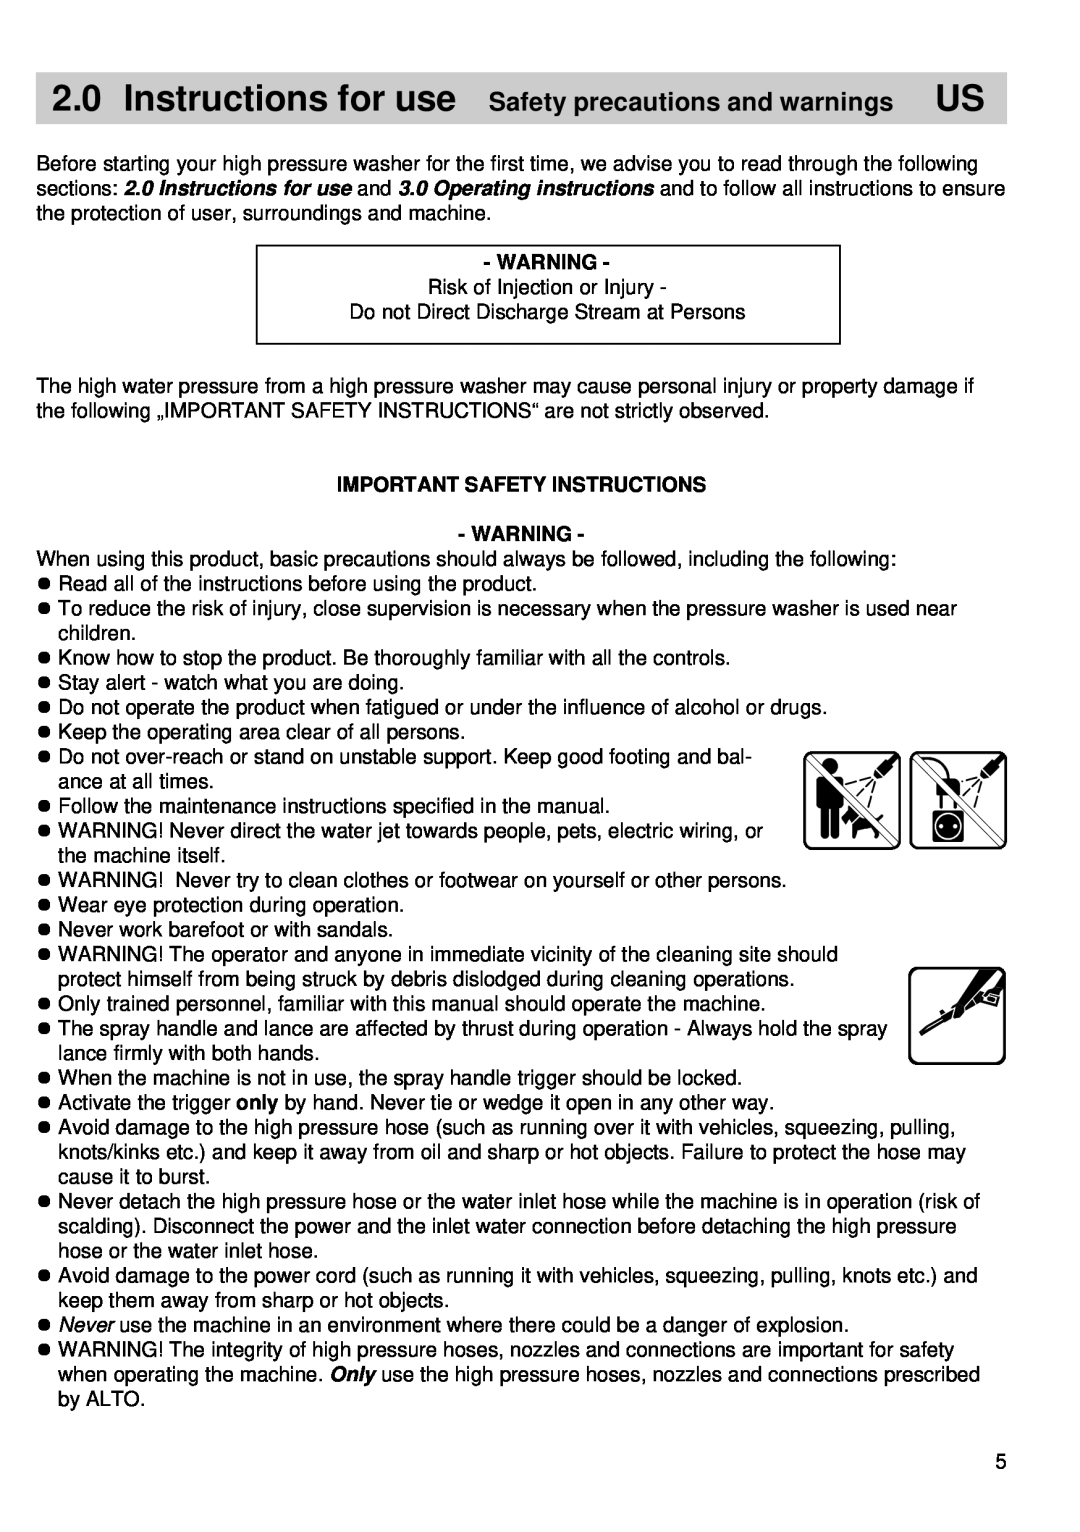 Alto-Shaam 52C3KSA -1, 52C3KSA -2 Instructions for use Safety precautions and warnings US, Important Safety Instructions 